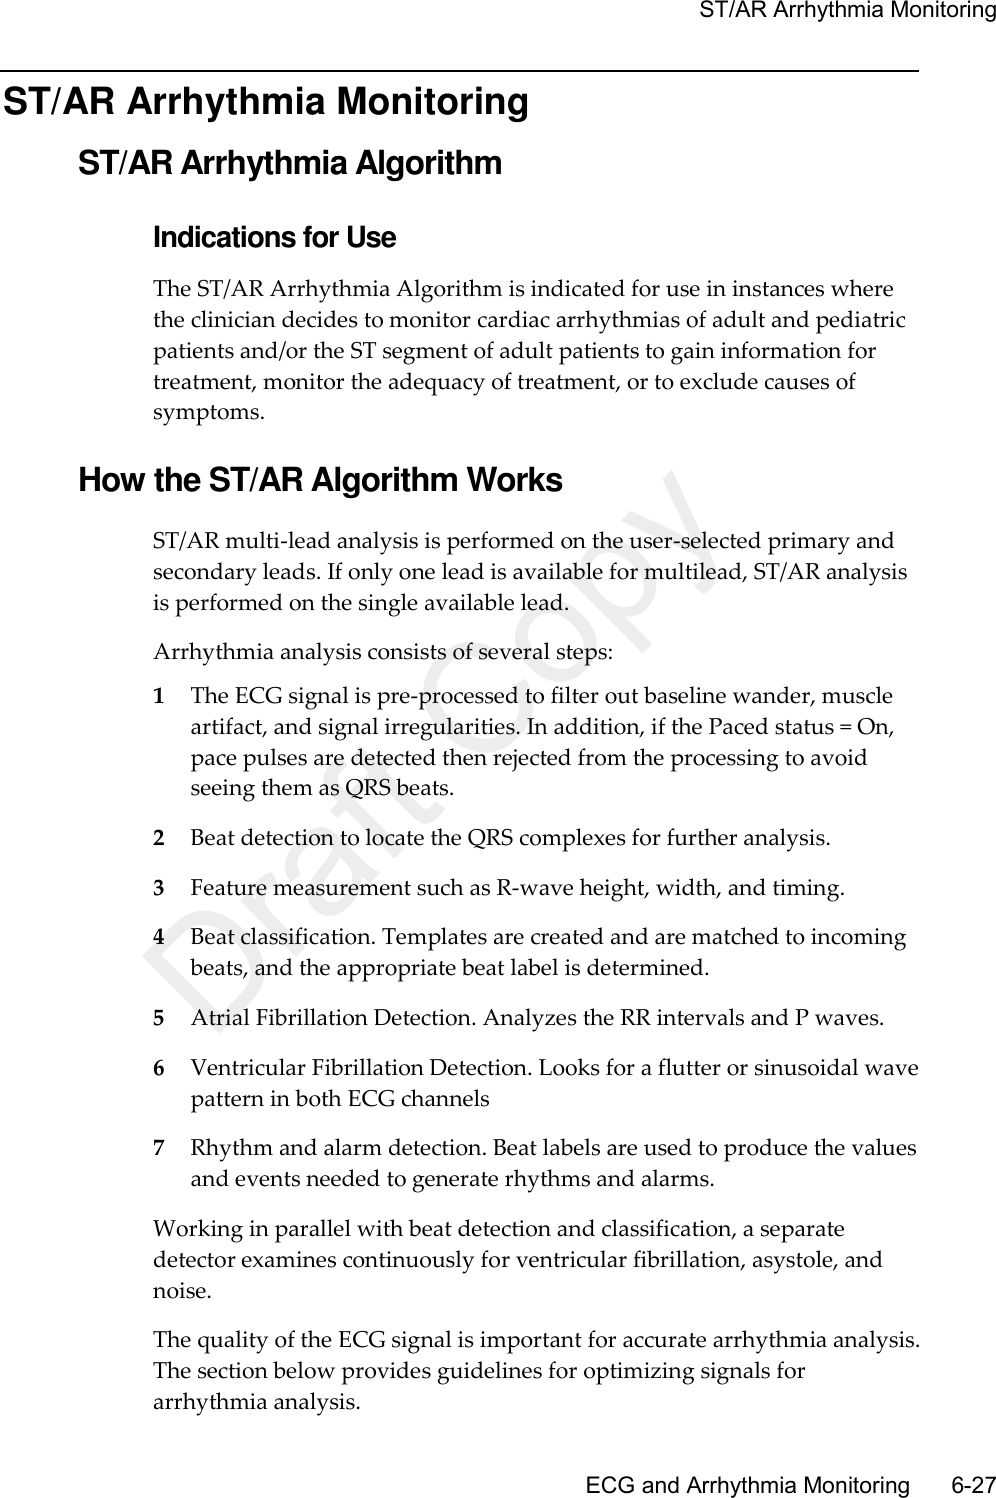     ST/AR Arrhythmia Monitoring       ECG and Arrhythmia Monitoring      6-27 ST/AR Arrhythmia Monitoring ST/AR Arrhythmia Algorithm Indications for Use The ST/AR Arrhythmia Algorithm is indicated for use in instances where the clinician decides to monitor cardiac arrhythmias of adult and pediatric patients and/or the ST segment of adult patients to gain information for treatment, monitor the adequacy of treatment, or to exclude causes of symptoms.  How the ST/AR Algorithm Works ST/AR multi-lead analysis is performed on the user-selected primary and secondary leads. If only one lead is available for multilead, ST/AR analysis is performed on the single available lead. Arrhythmia analysis consists of several steps: 1 The ECG signal is pre-processed to filter out baseline wander, muscle artifact, and signal irregularities. In addition, if the Paced status = On, pace pulses are detected then rejected from the processing to avoid seeing them as QRS beats. 2 Beat detection to locate the QRS complexes for further analysis. 3 Feature measurement such as R-wave height, width, and timing. 4 Beat classification. Templates are created and are matched to incoming beats, and the appropriate beat label is determined. 5 Atrial Fibrillation Detection. Analyzes the RR intervals and P waves. 6 Ventricular Fibrillation Detection. Looks for a flutter or sinusoidal wave pattern in both ECG channels 7 Rhythm and alarm detection. Beat labels are used to produce the values and events needed to generate rhythms and alarms. Working in parallel with beat detection and classification, a separate detector examines continuously for ventricular fibrillation, asystole, and noise. The quality of the ECG signal is important for accurate arrhythmia analysis. The section below provides guidelines for optimizing signals for arrhythmia analysis. Draft Copy